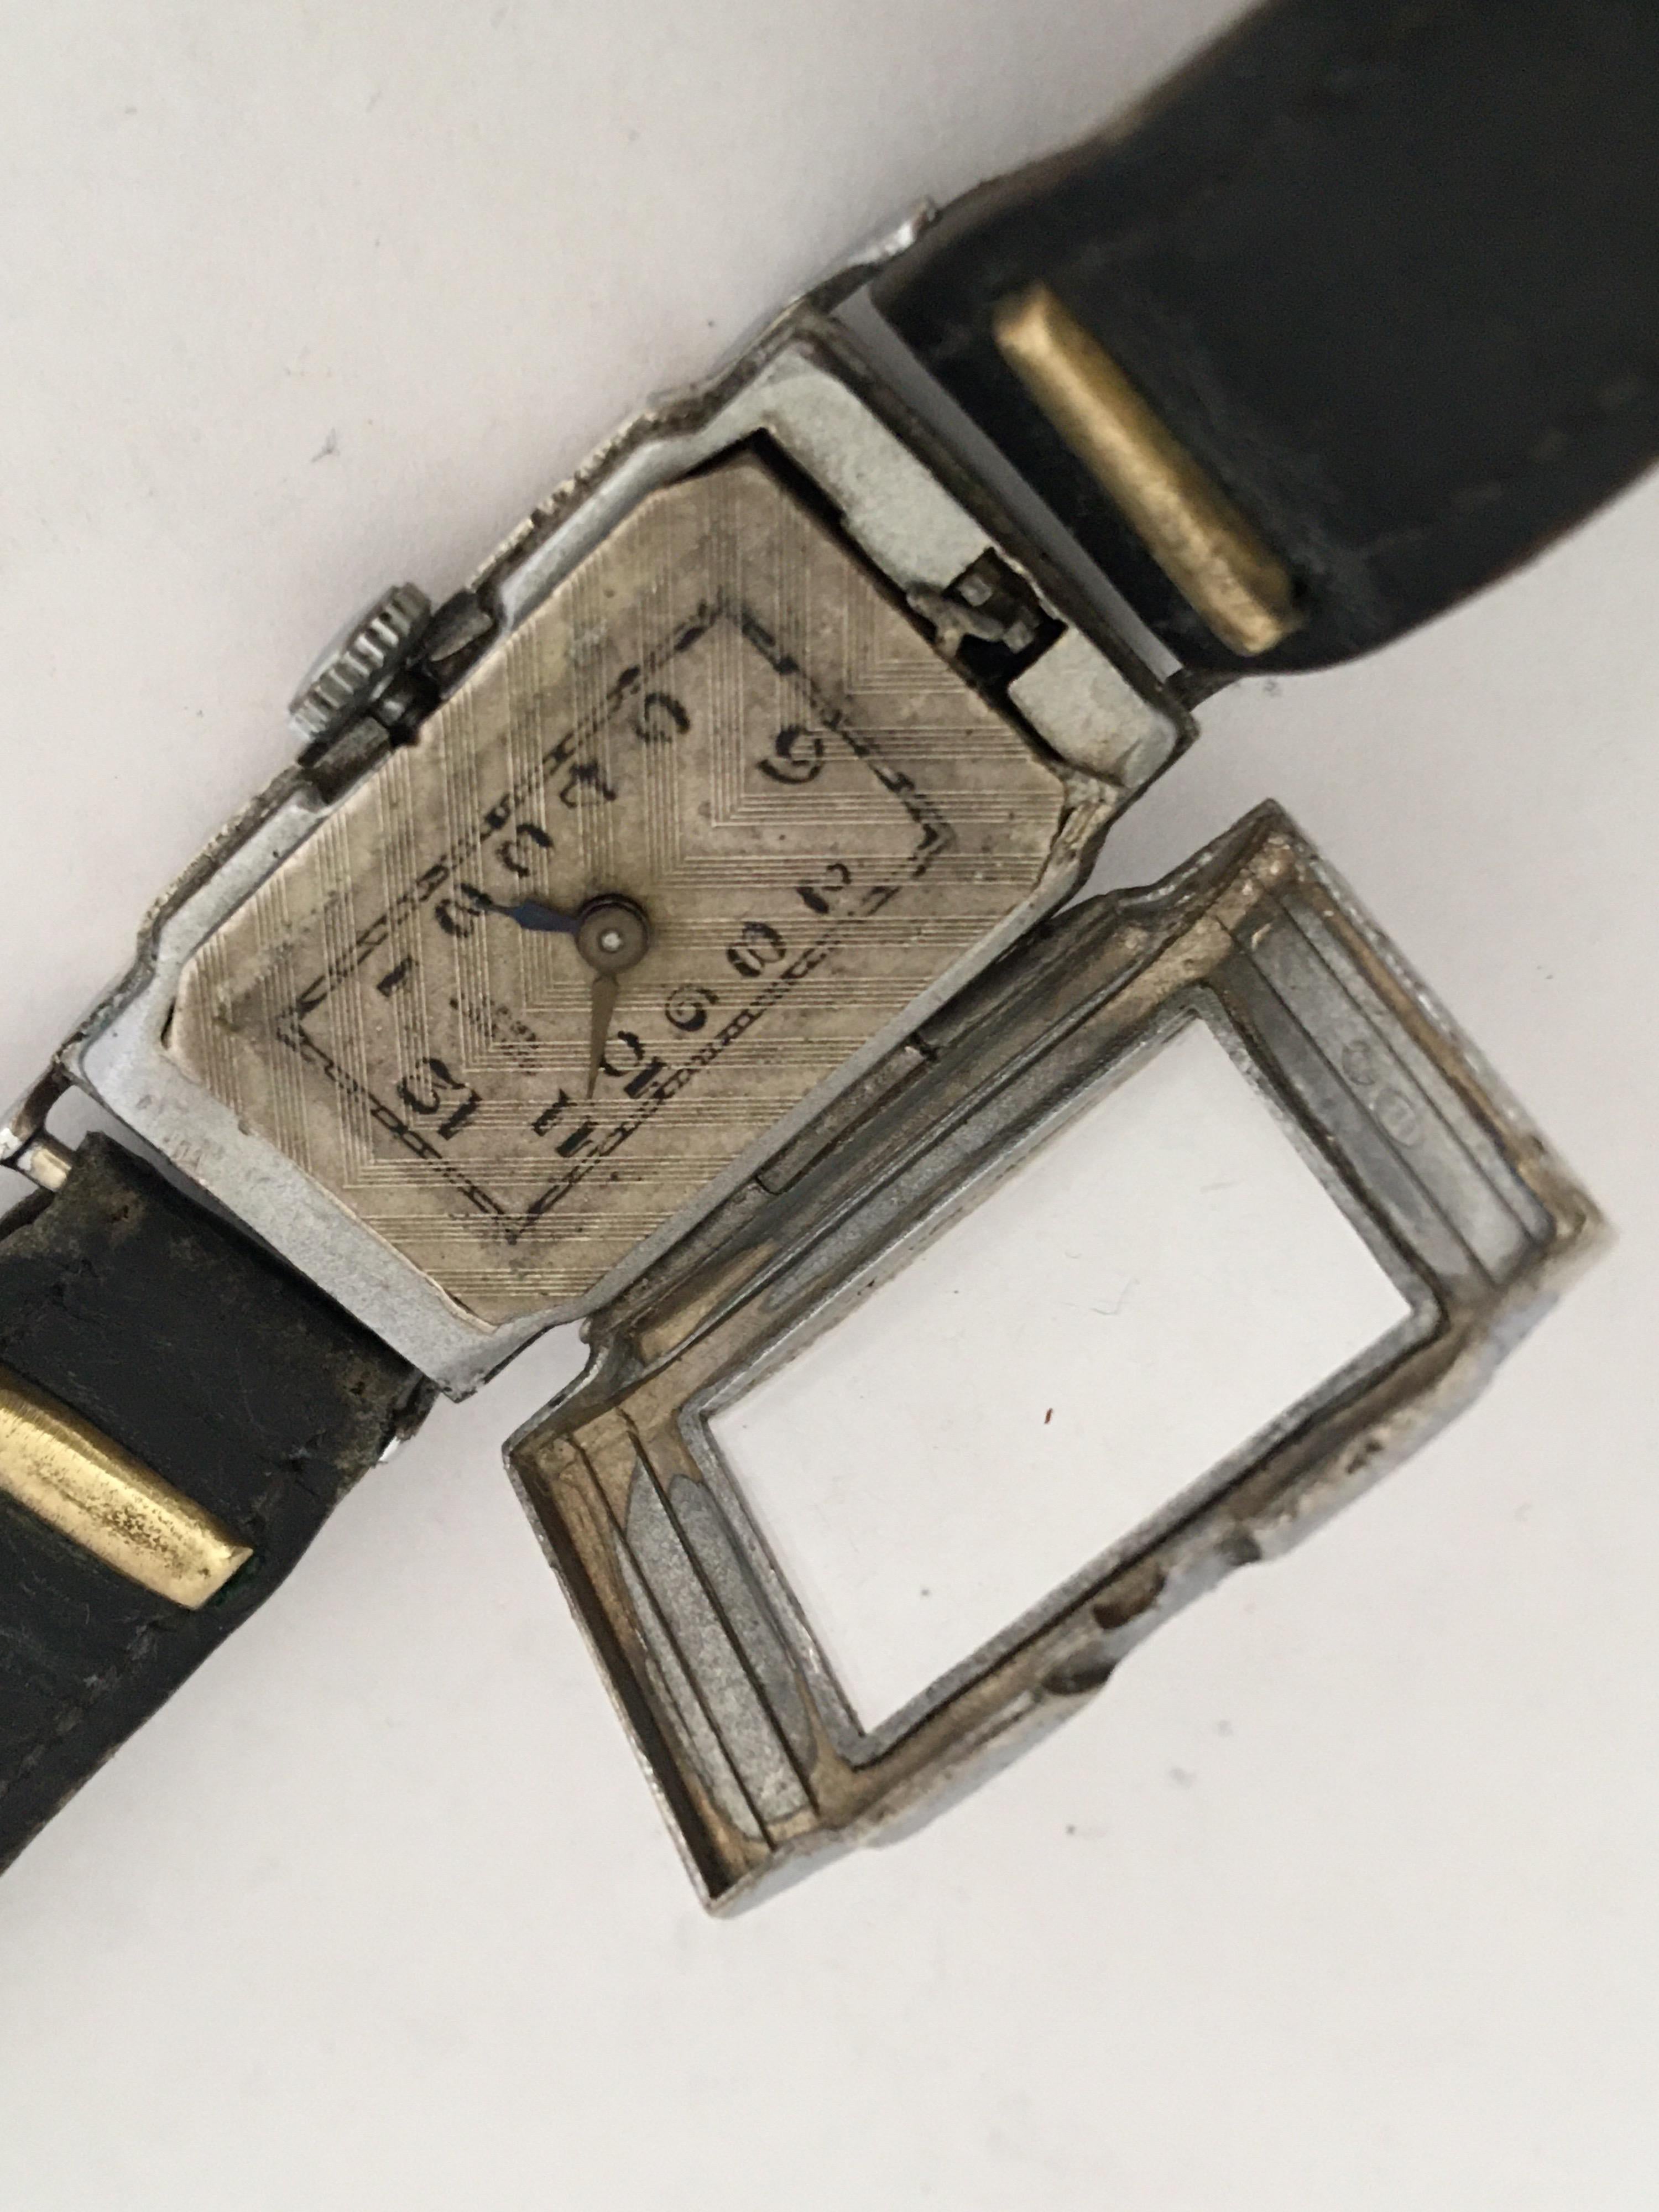 Rare Vintage 1930s Fortis Autorist Self Winding Watch by John Harwood In Good Condition For Sale In Carlisle, GB